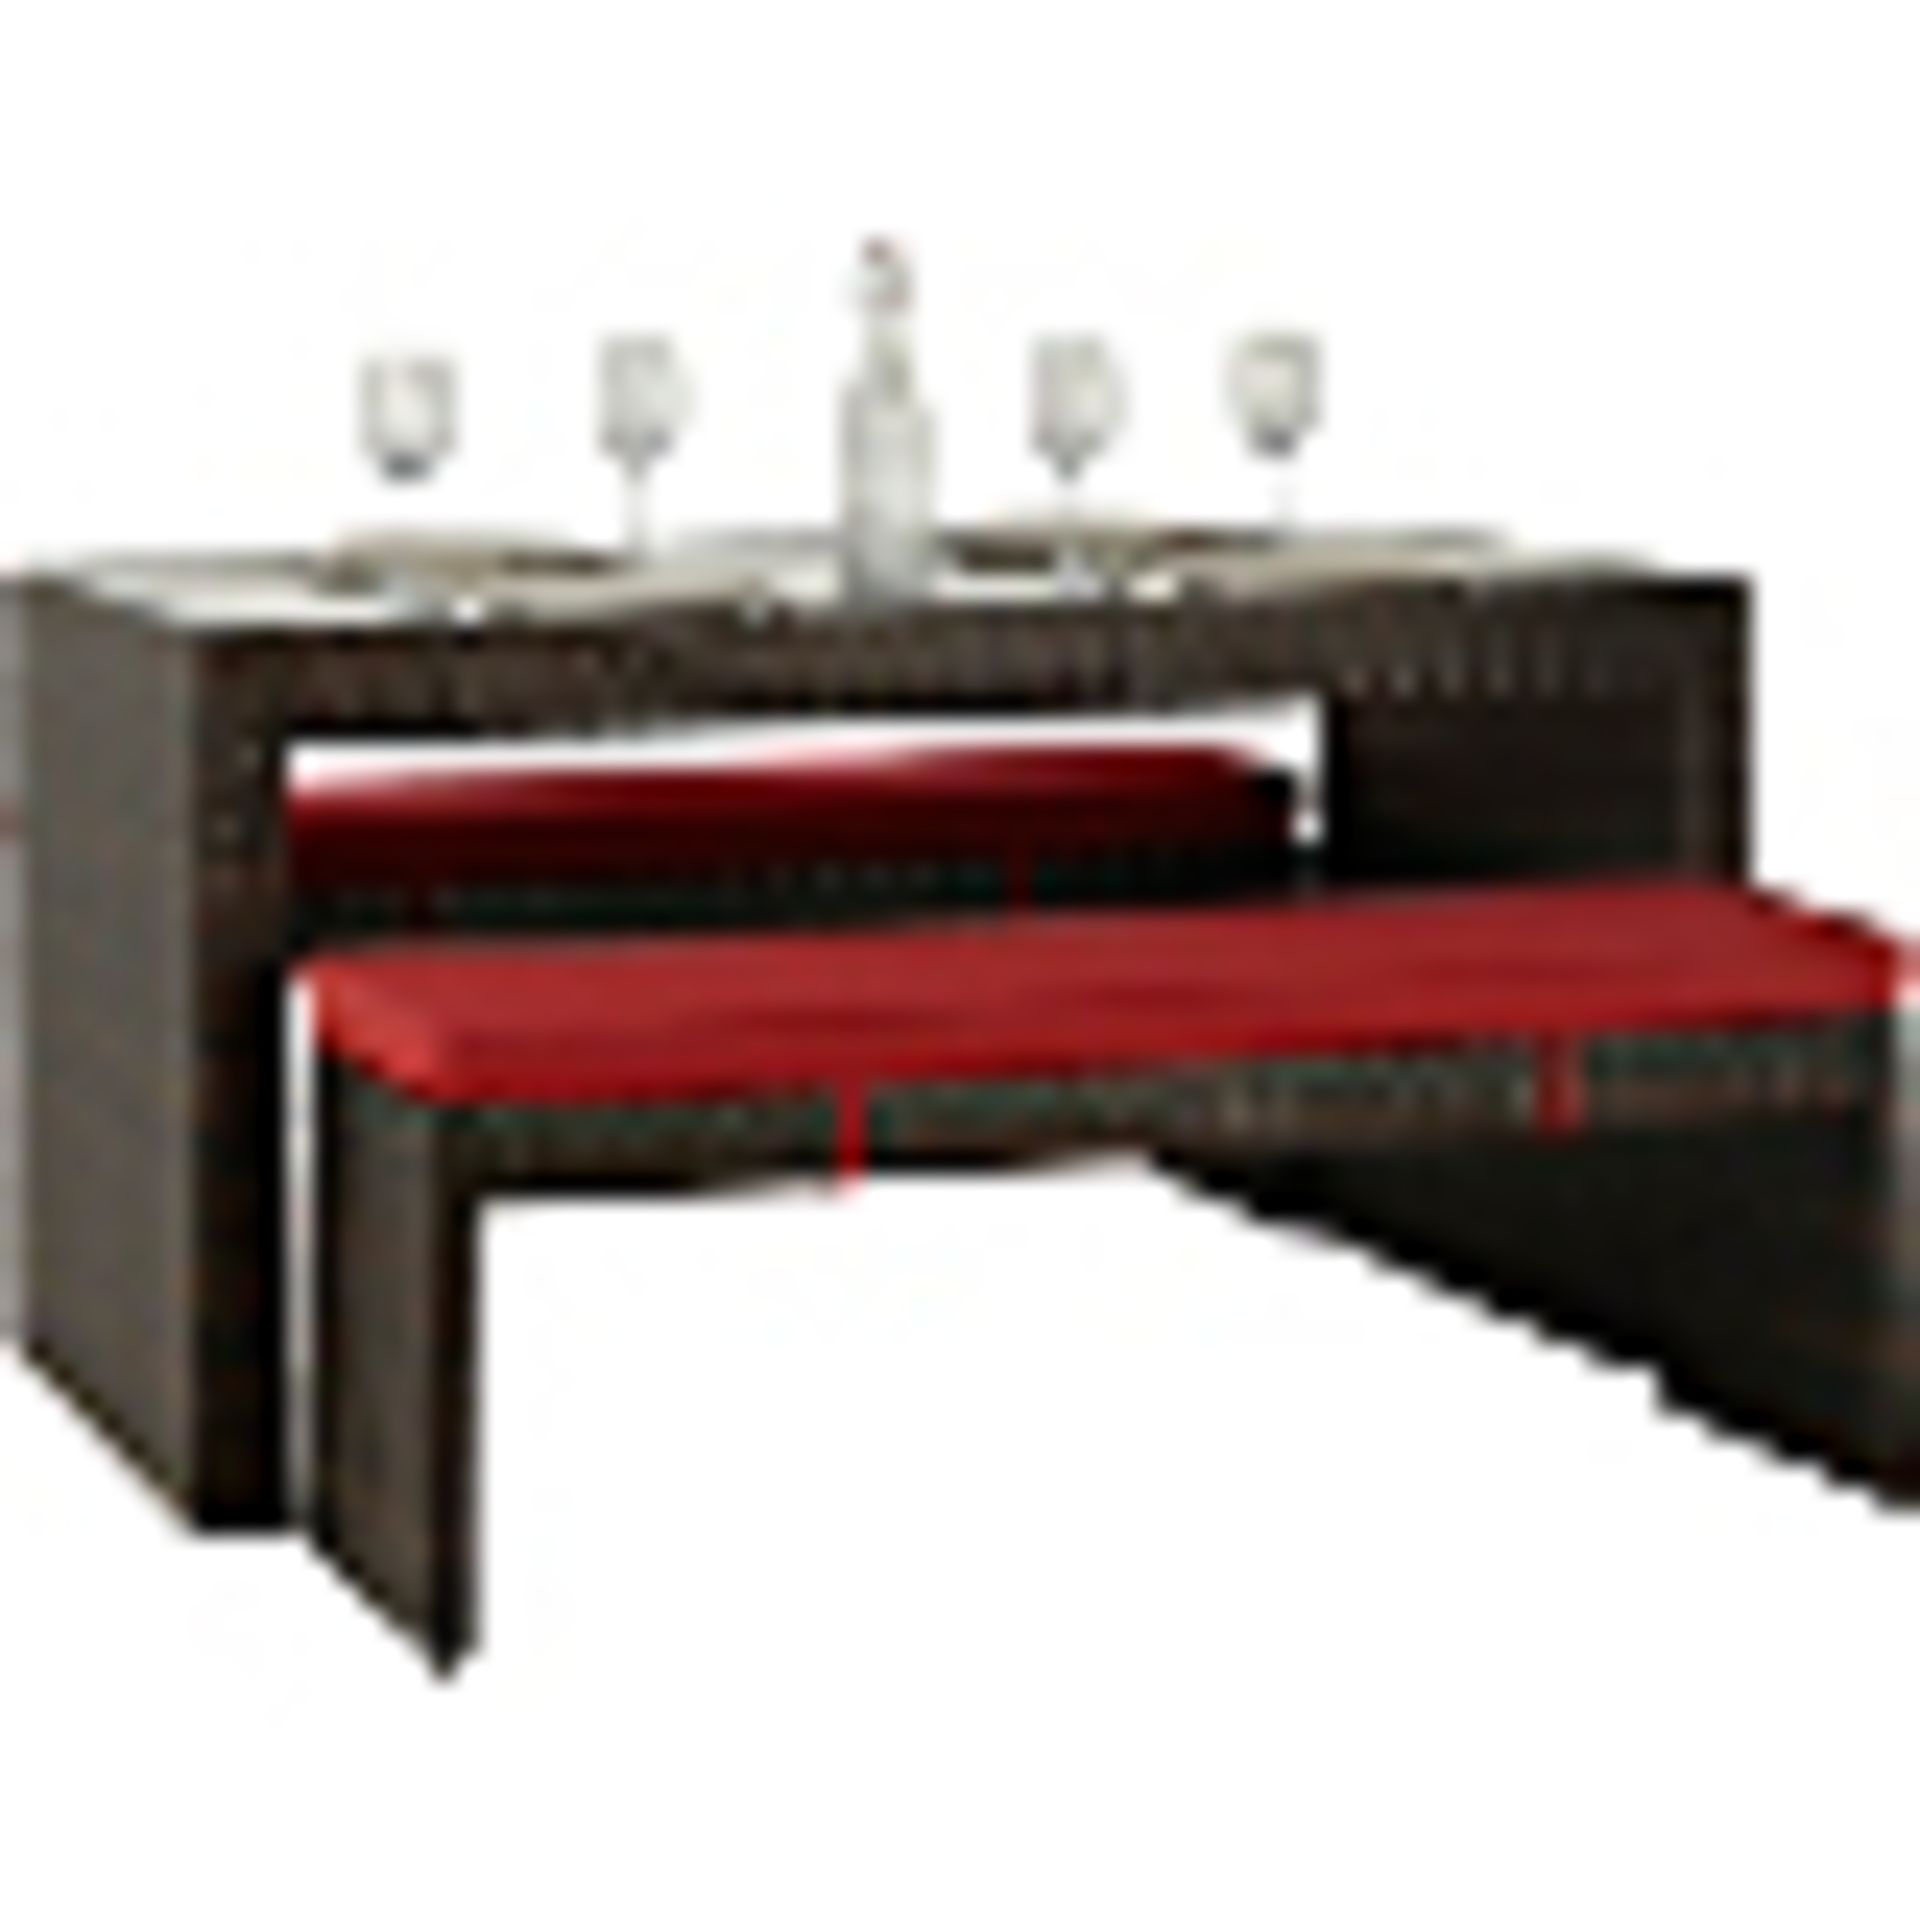 Jakarta 3pc deluxe bench dining set, red colour. New and boxed. See picture for design. RRP £329.